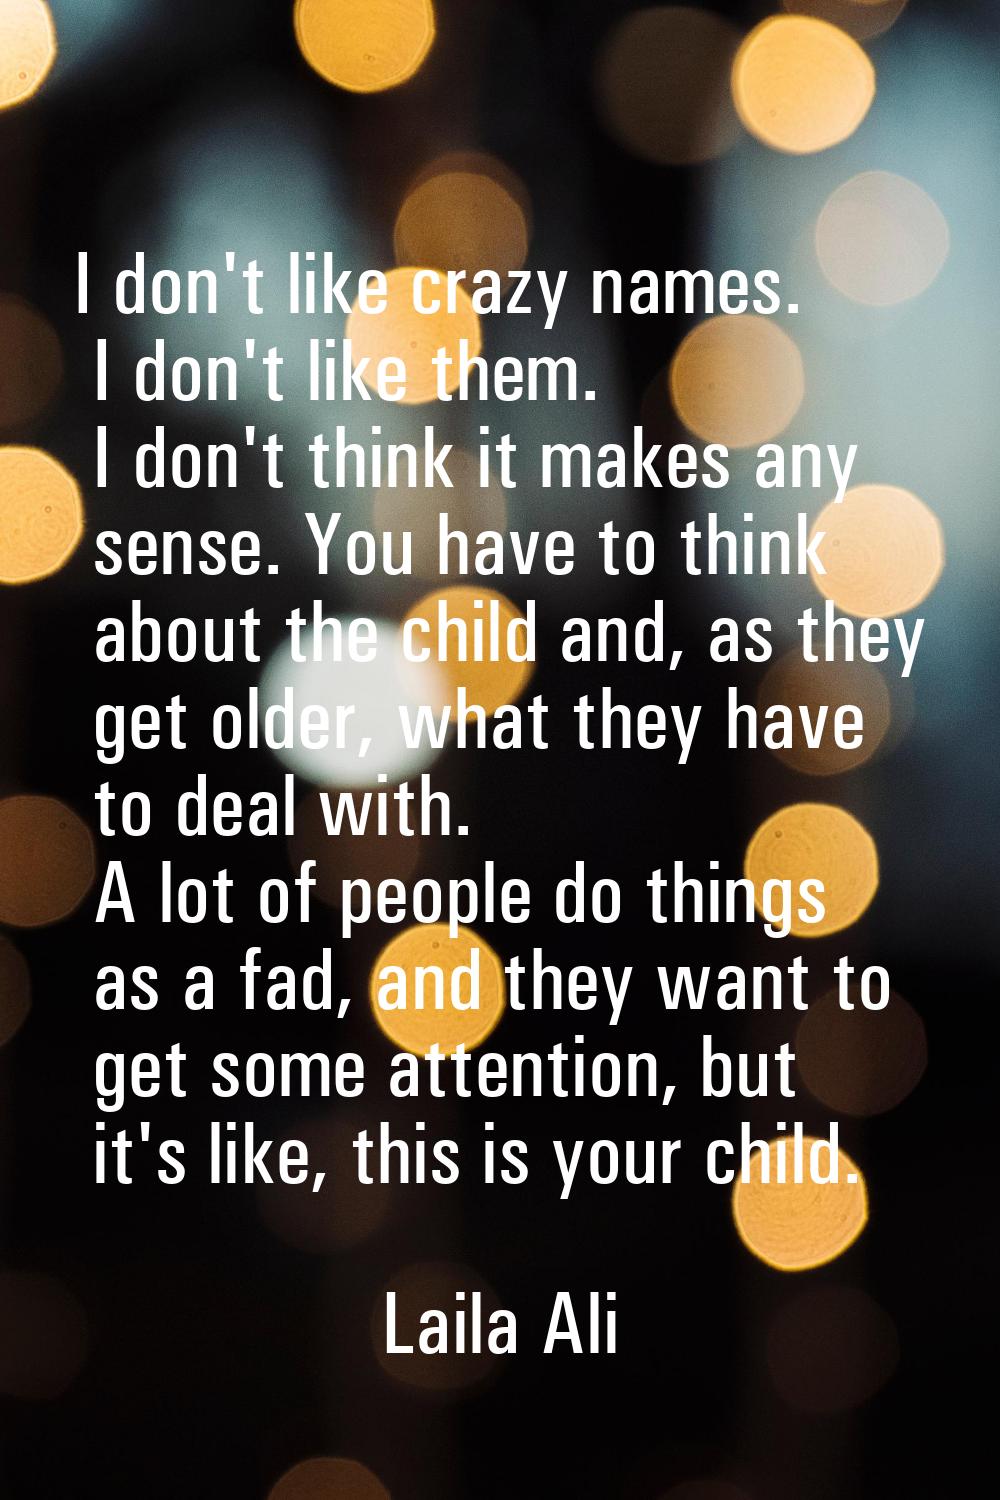 I don't like crazy names. I don't like them. I don't think it makes any sense. You have to think ab